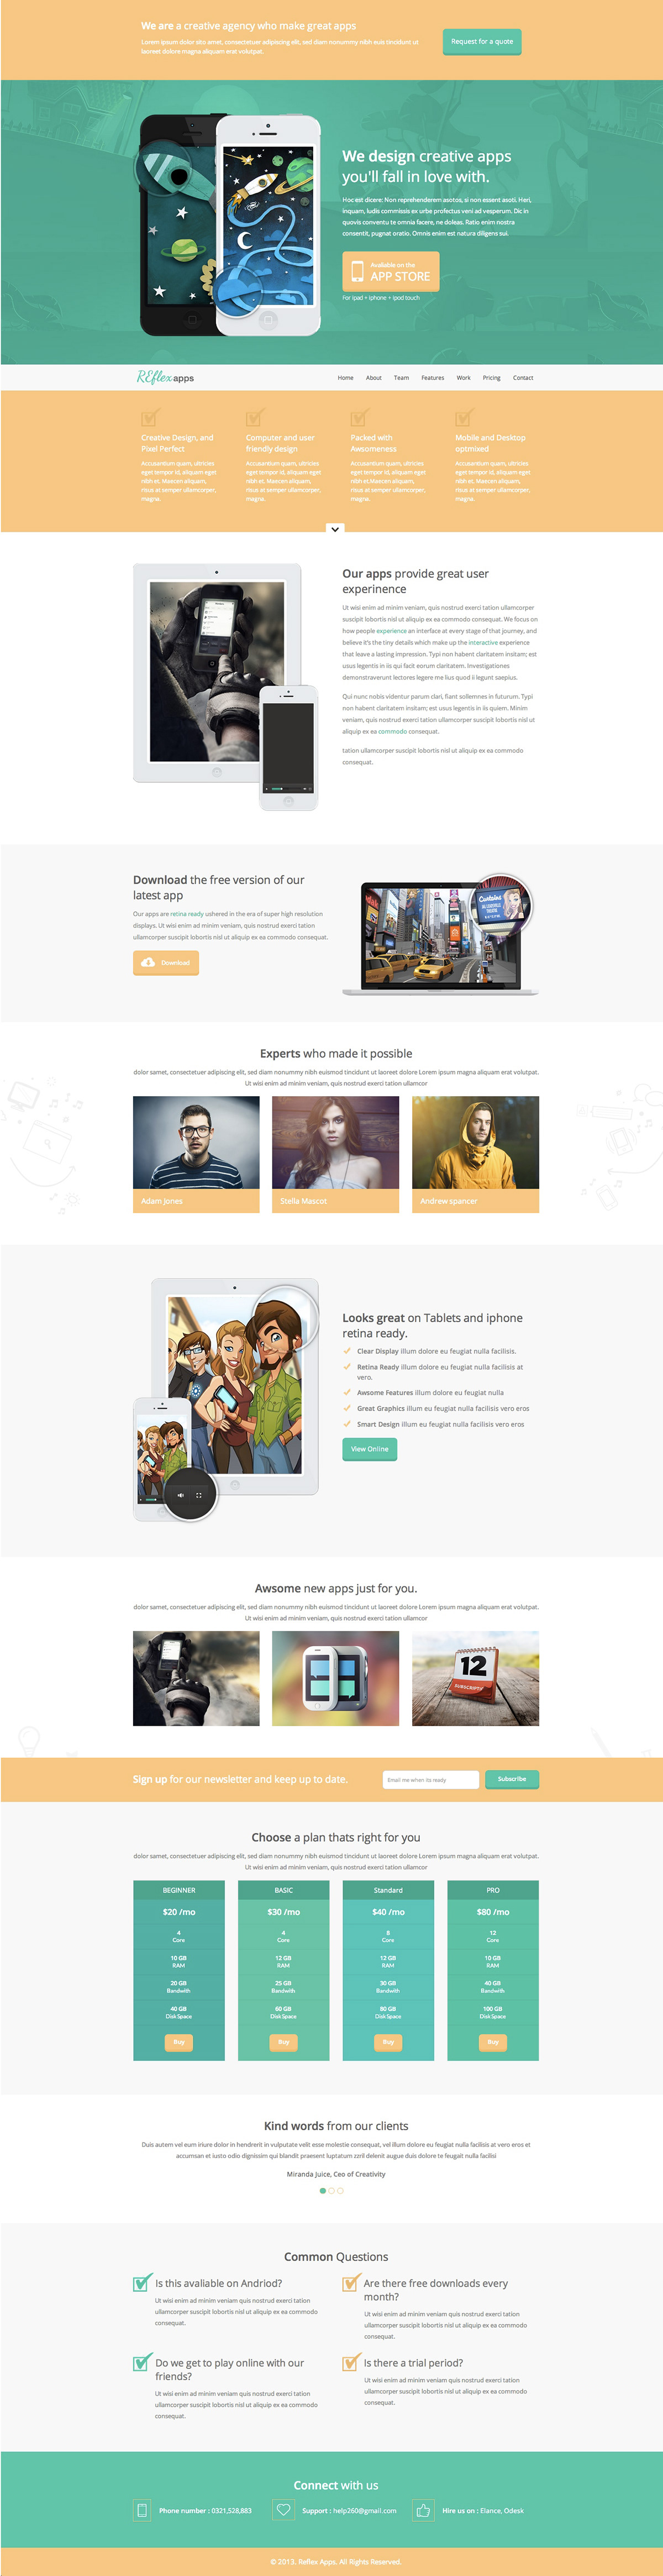 landing page Responsive flat design template modern foundation framework request a quote popup box